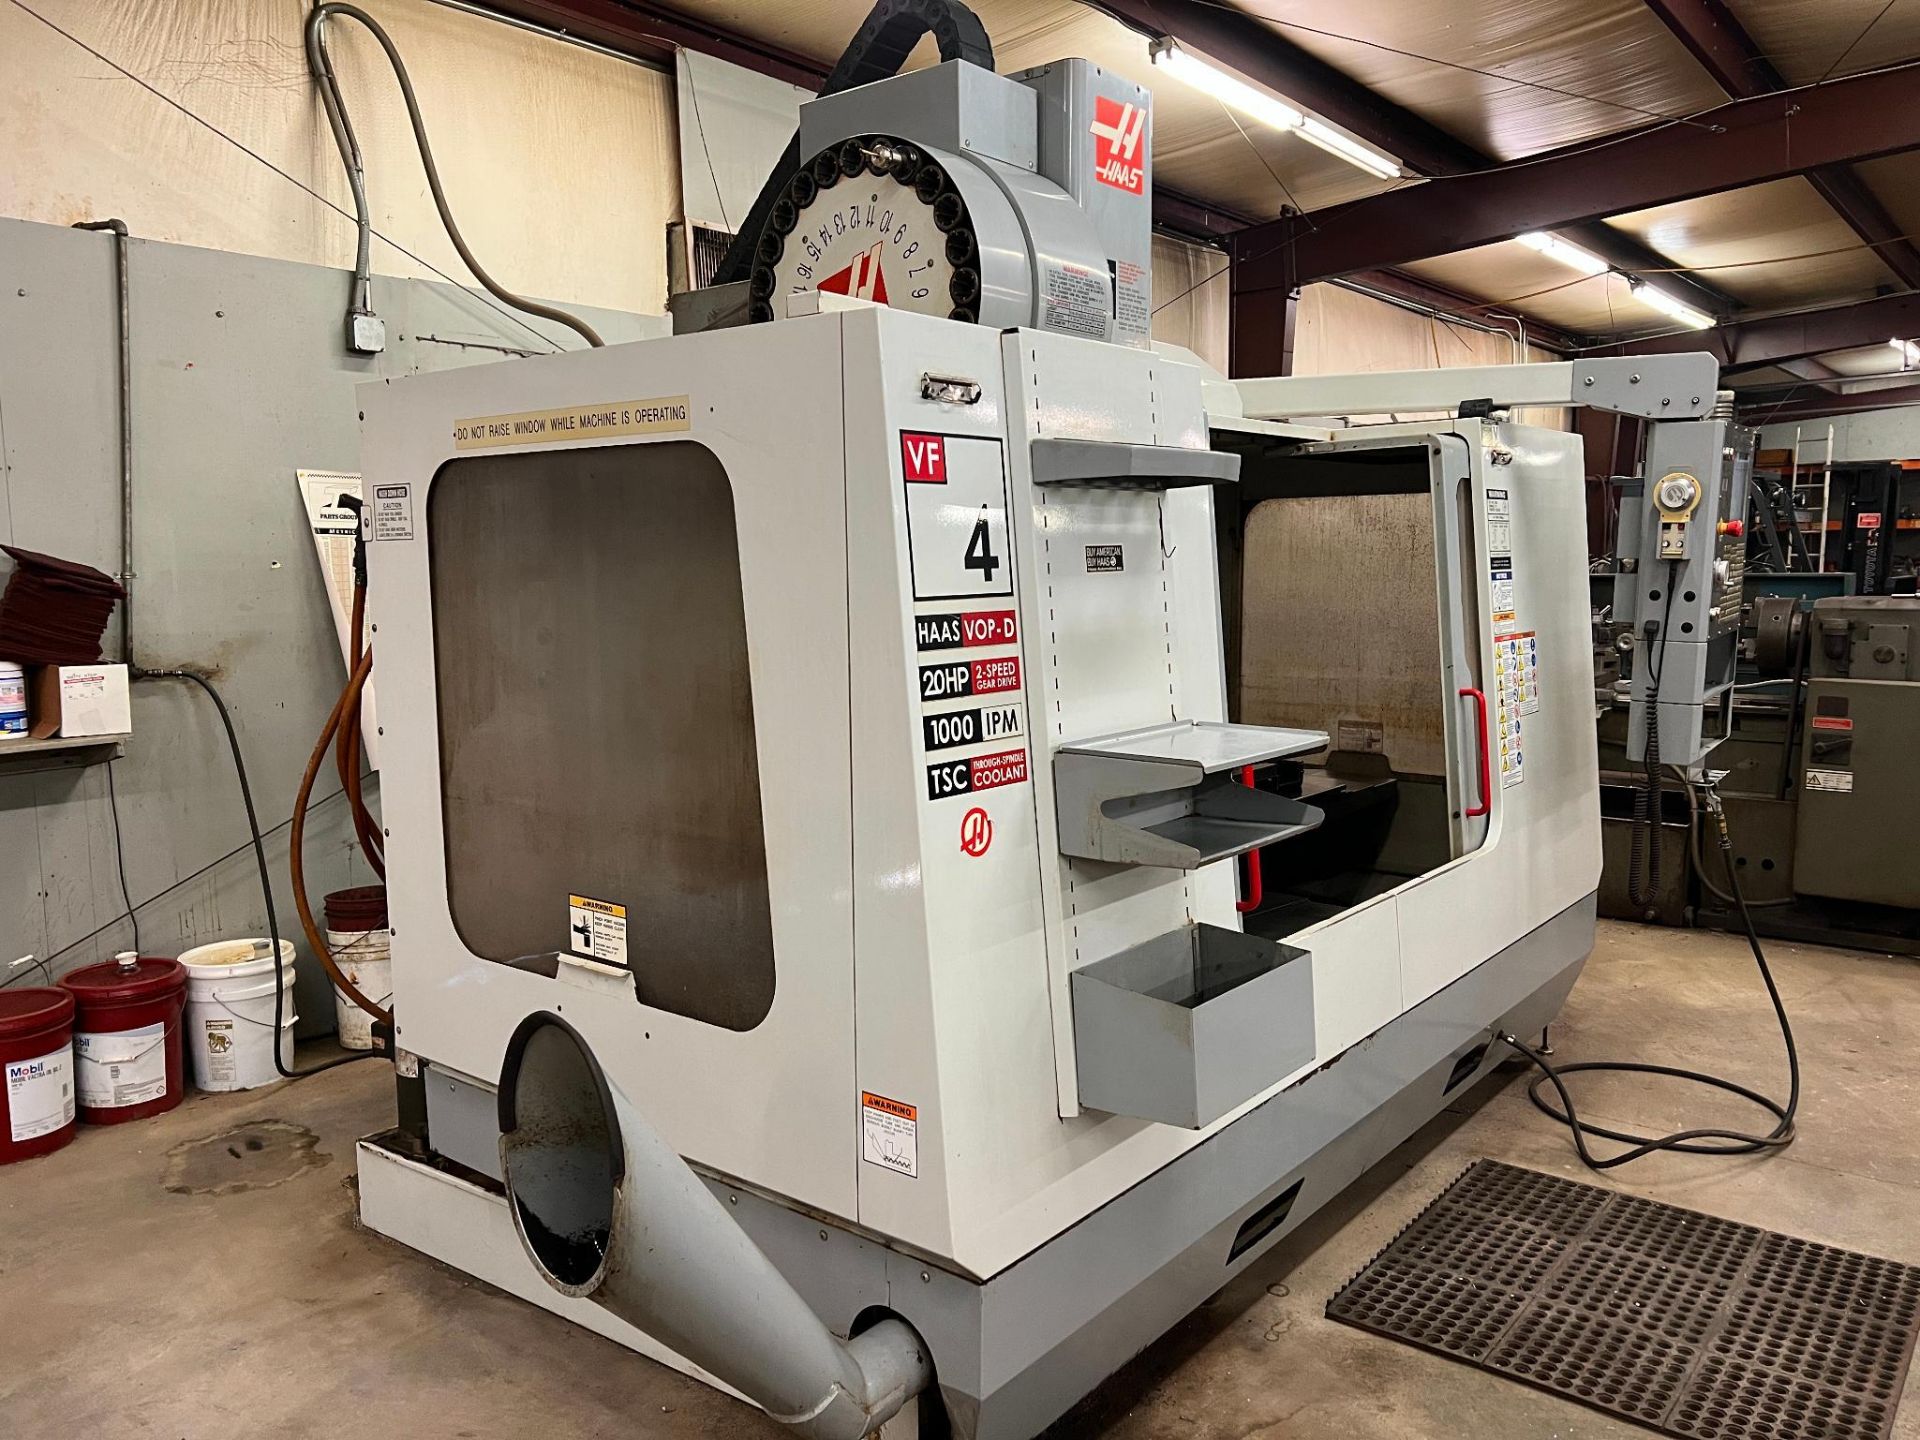 2005 Haas VF-4 VOP-D CNC Vertical Machining Center Serial Number: 42026 3-Axis Machine (4th axis car - Image 6 of 26